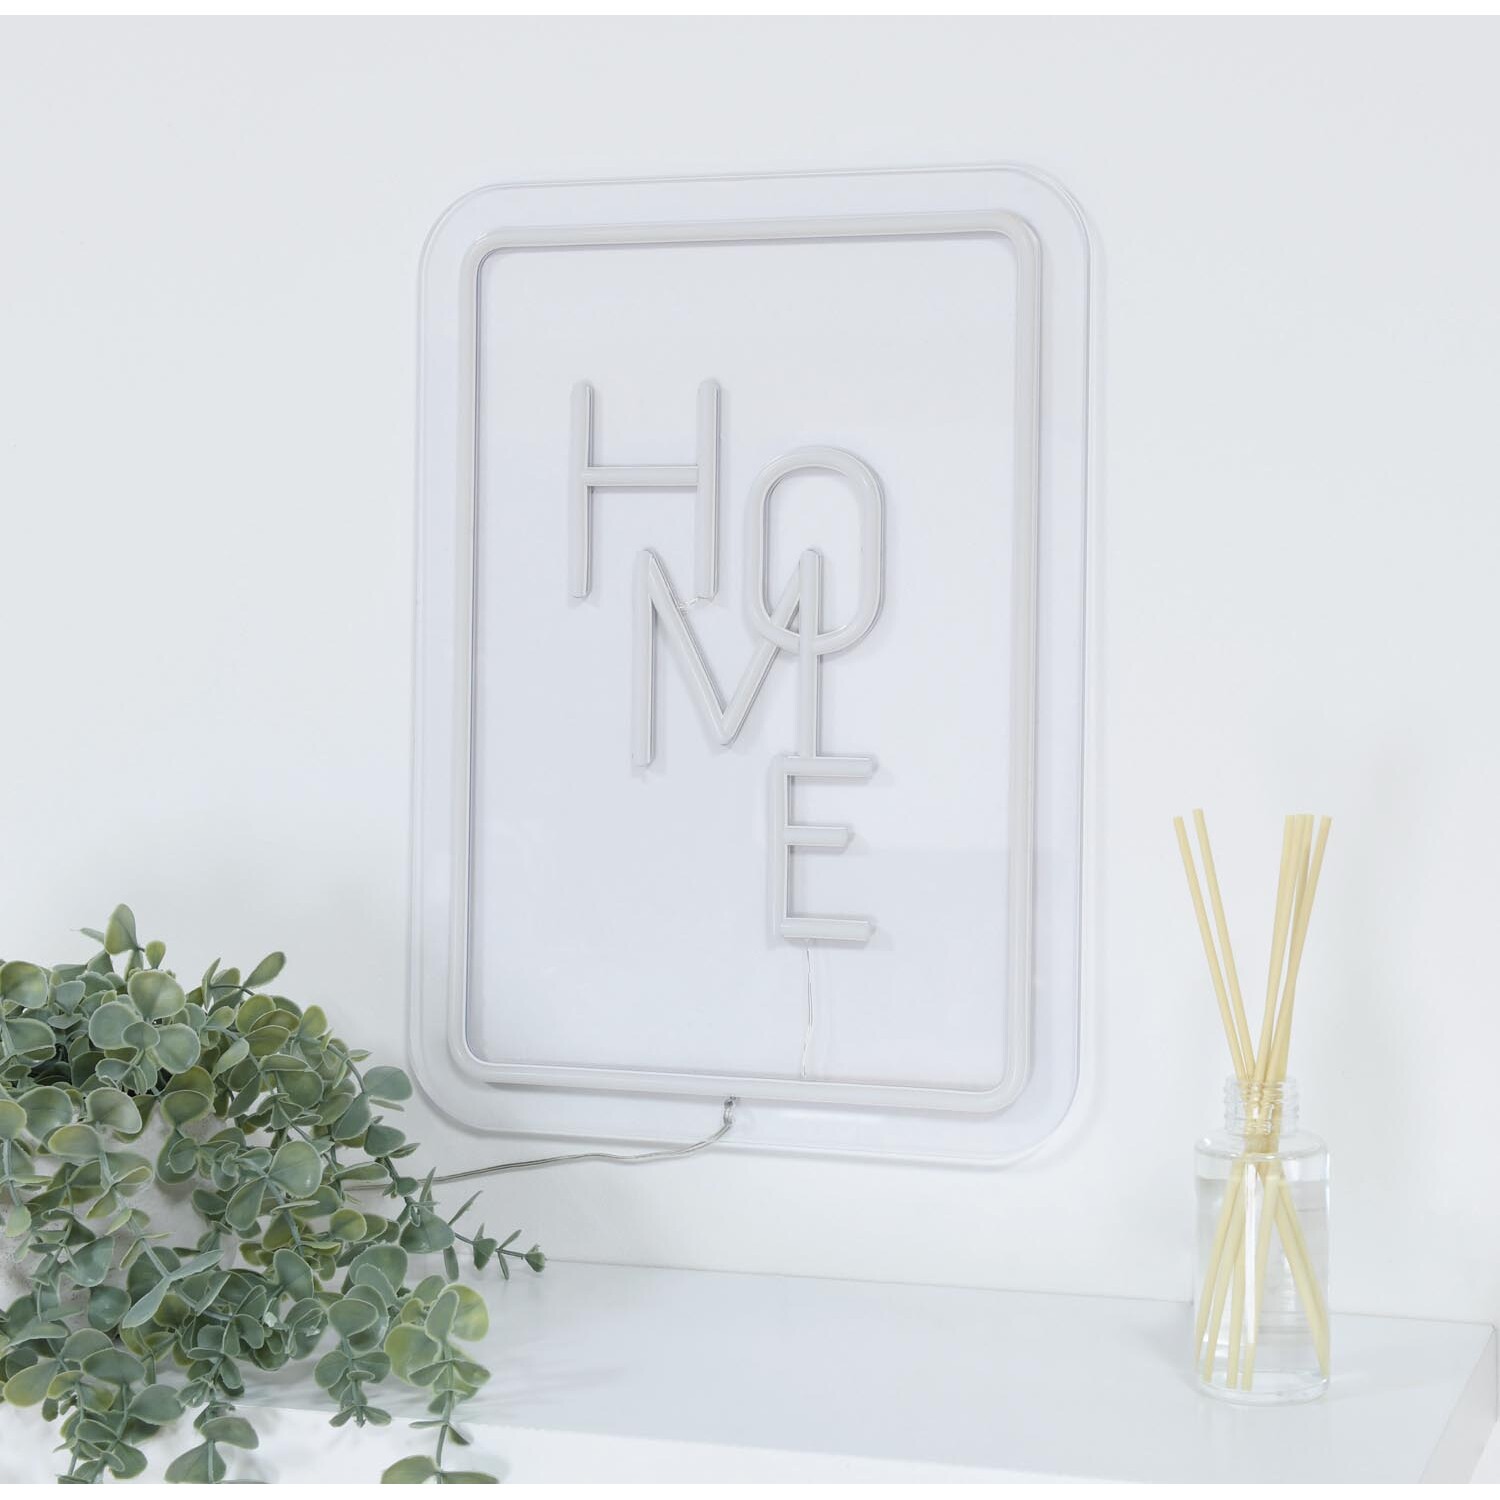 Home LED Neon Sign - Warm White Image 2